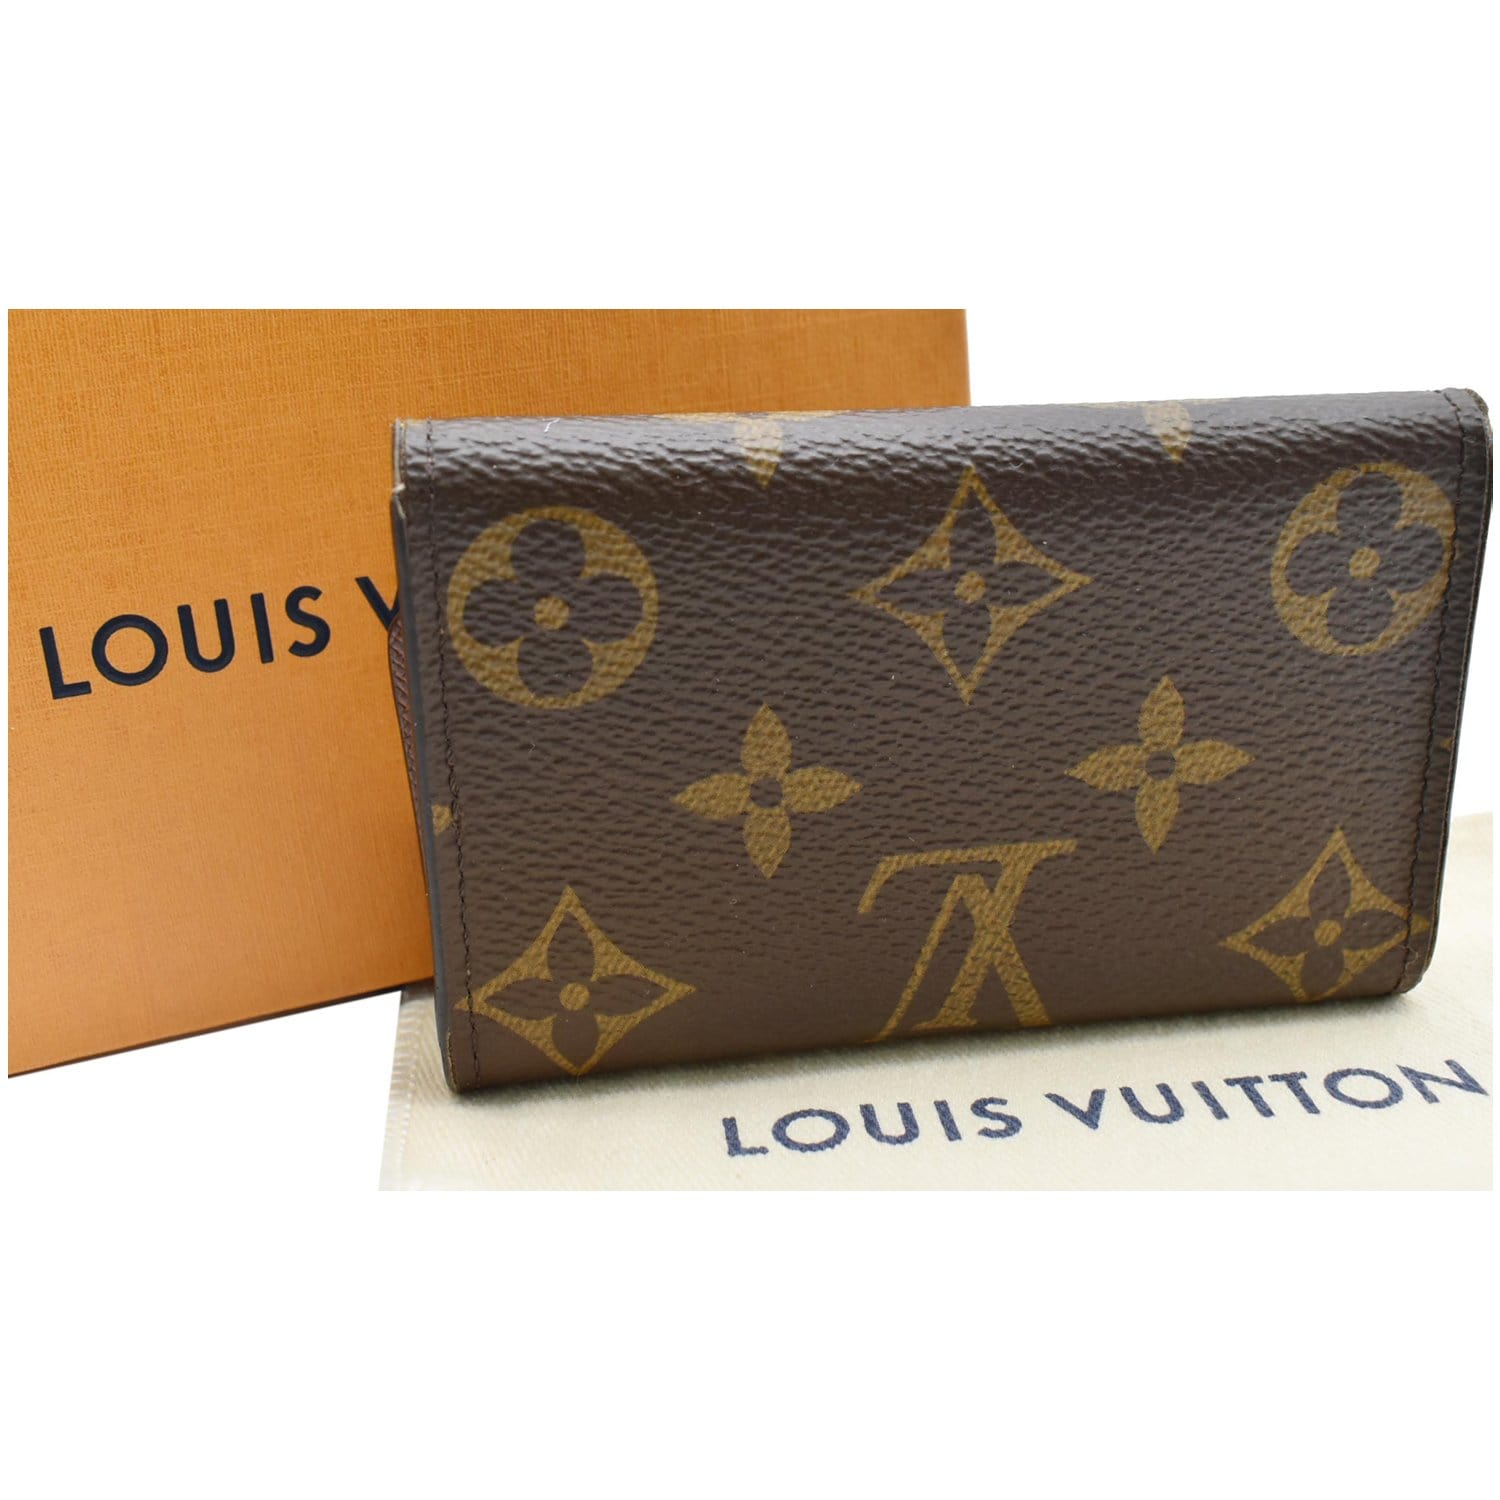 Louis Vuitton, Bags, Authentic Louis Vuitton Monogram Brown Tan 4 Ring  Key Holder Wallet With Snap